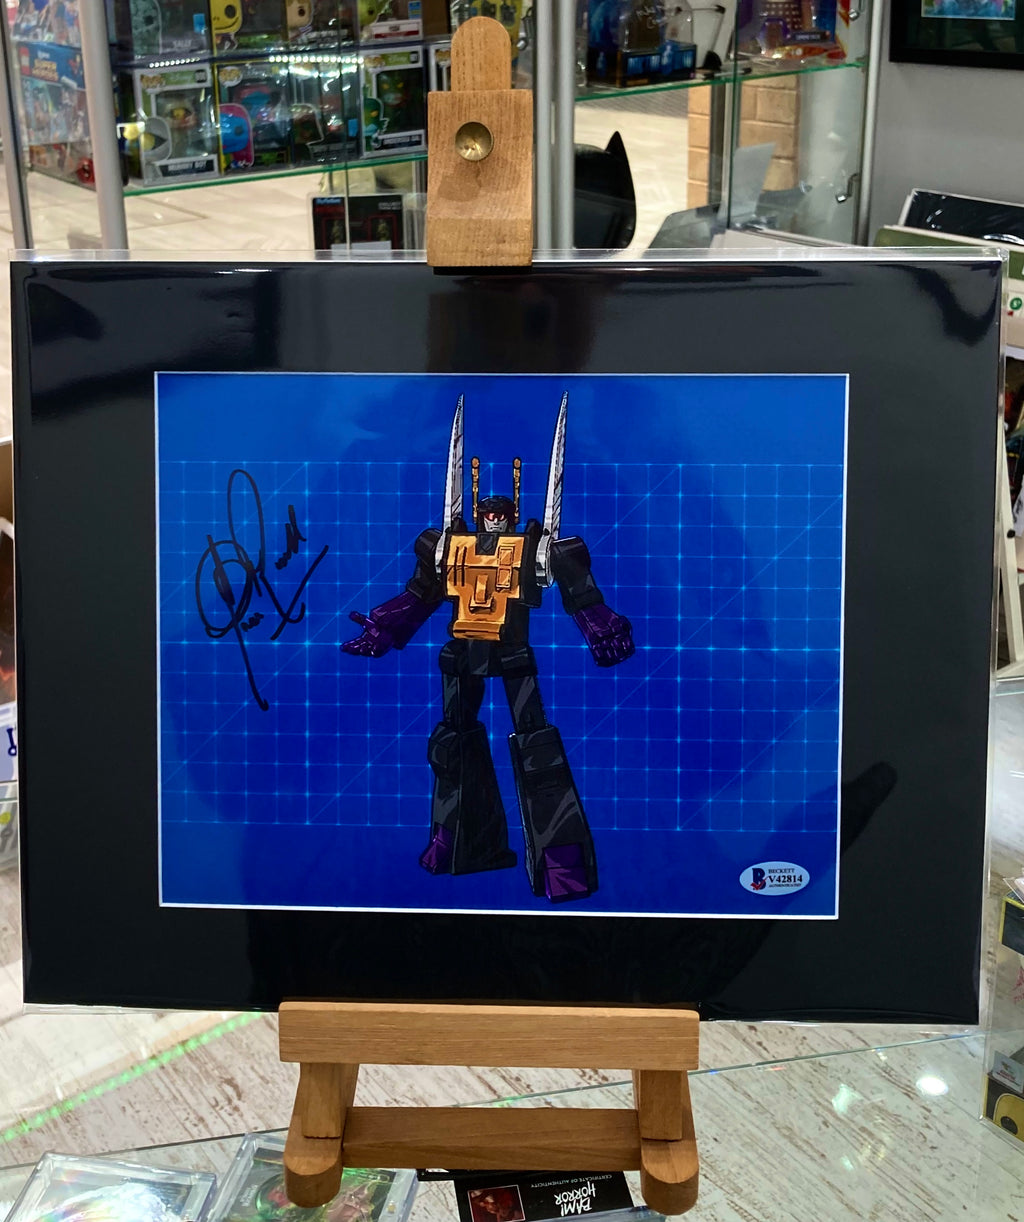 Transformers The Movie Clive Revill Autographed Mounted Photograph with Beckett Authenticity